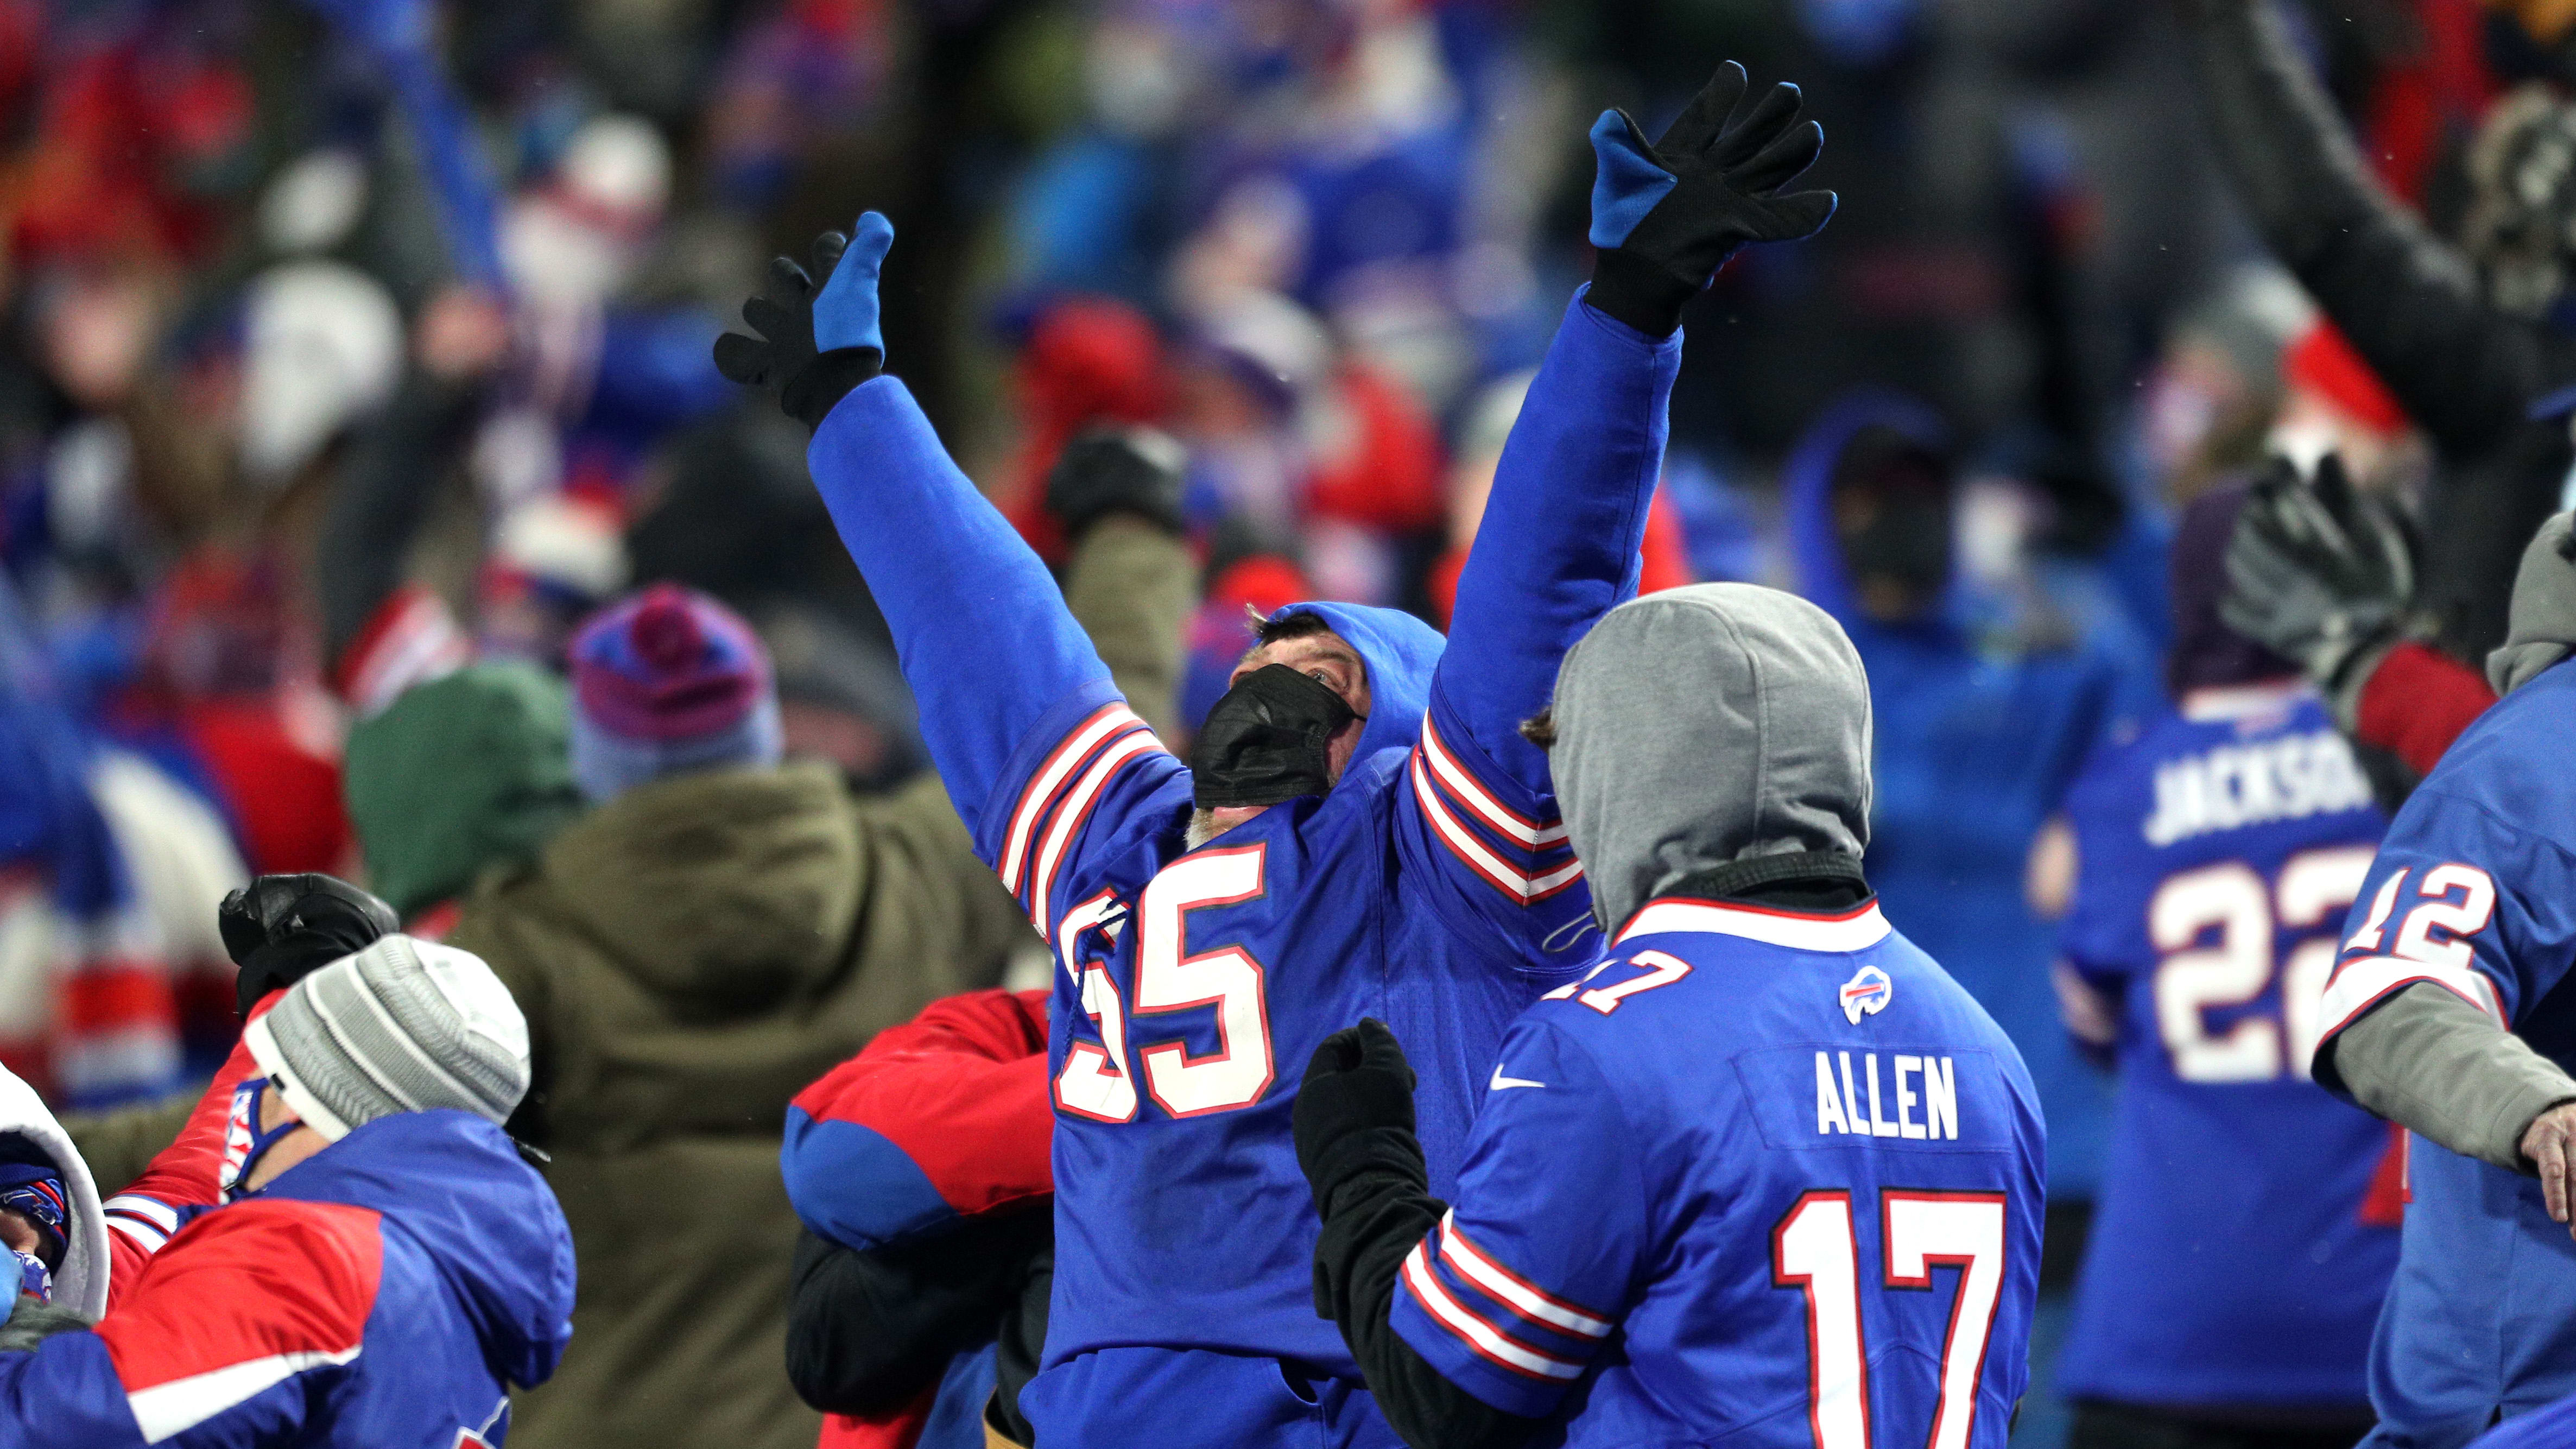 Buffalo Bills Super Bowl History: Wins, Losses, Appearances and All-Time Record